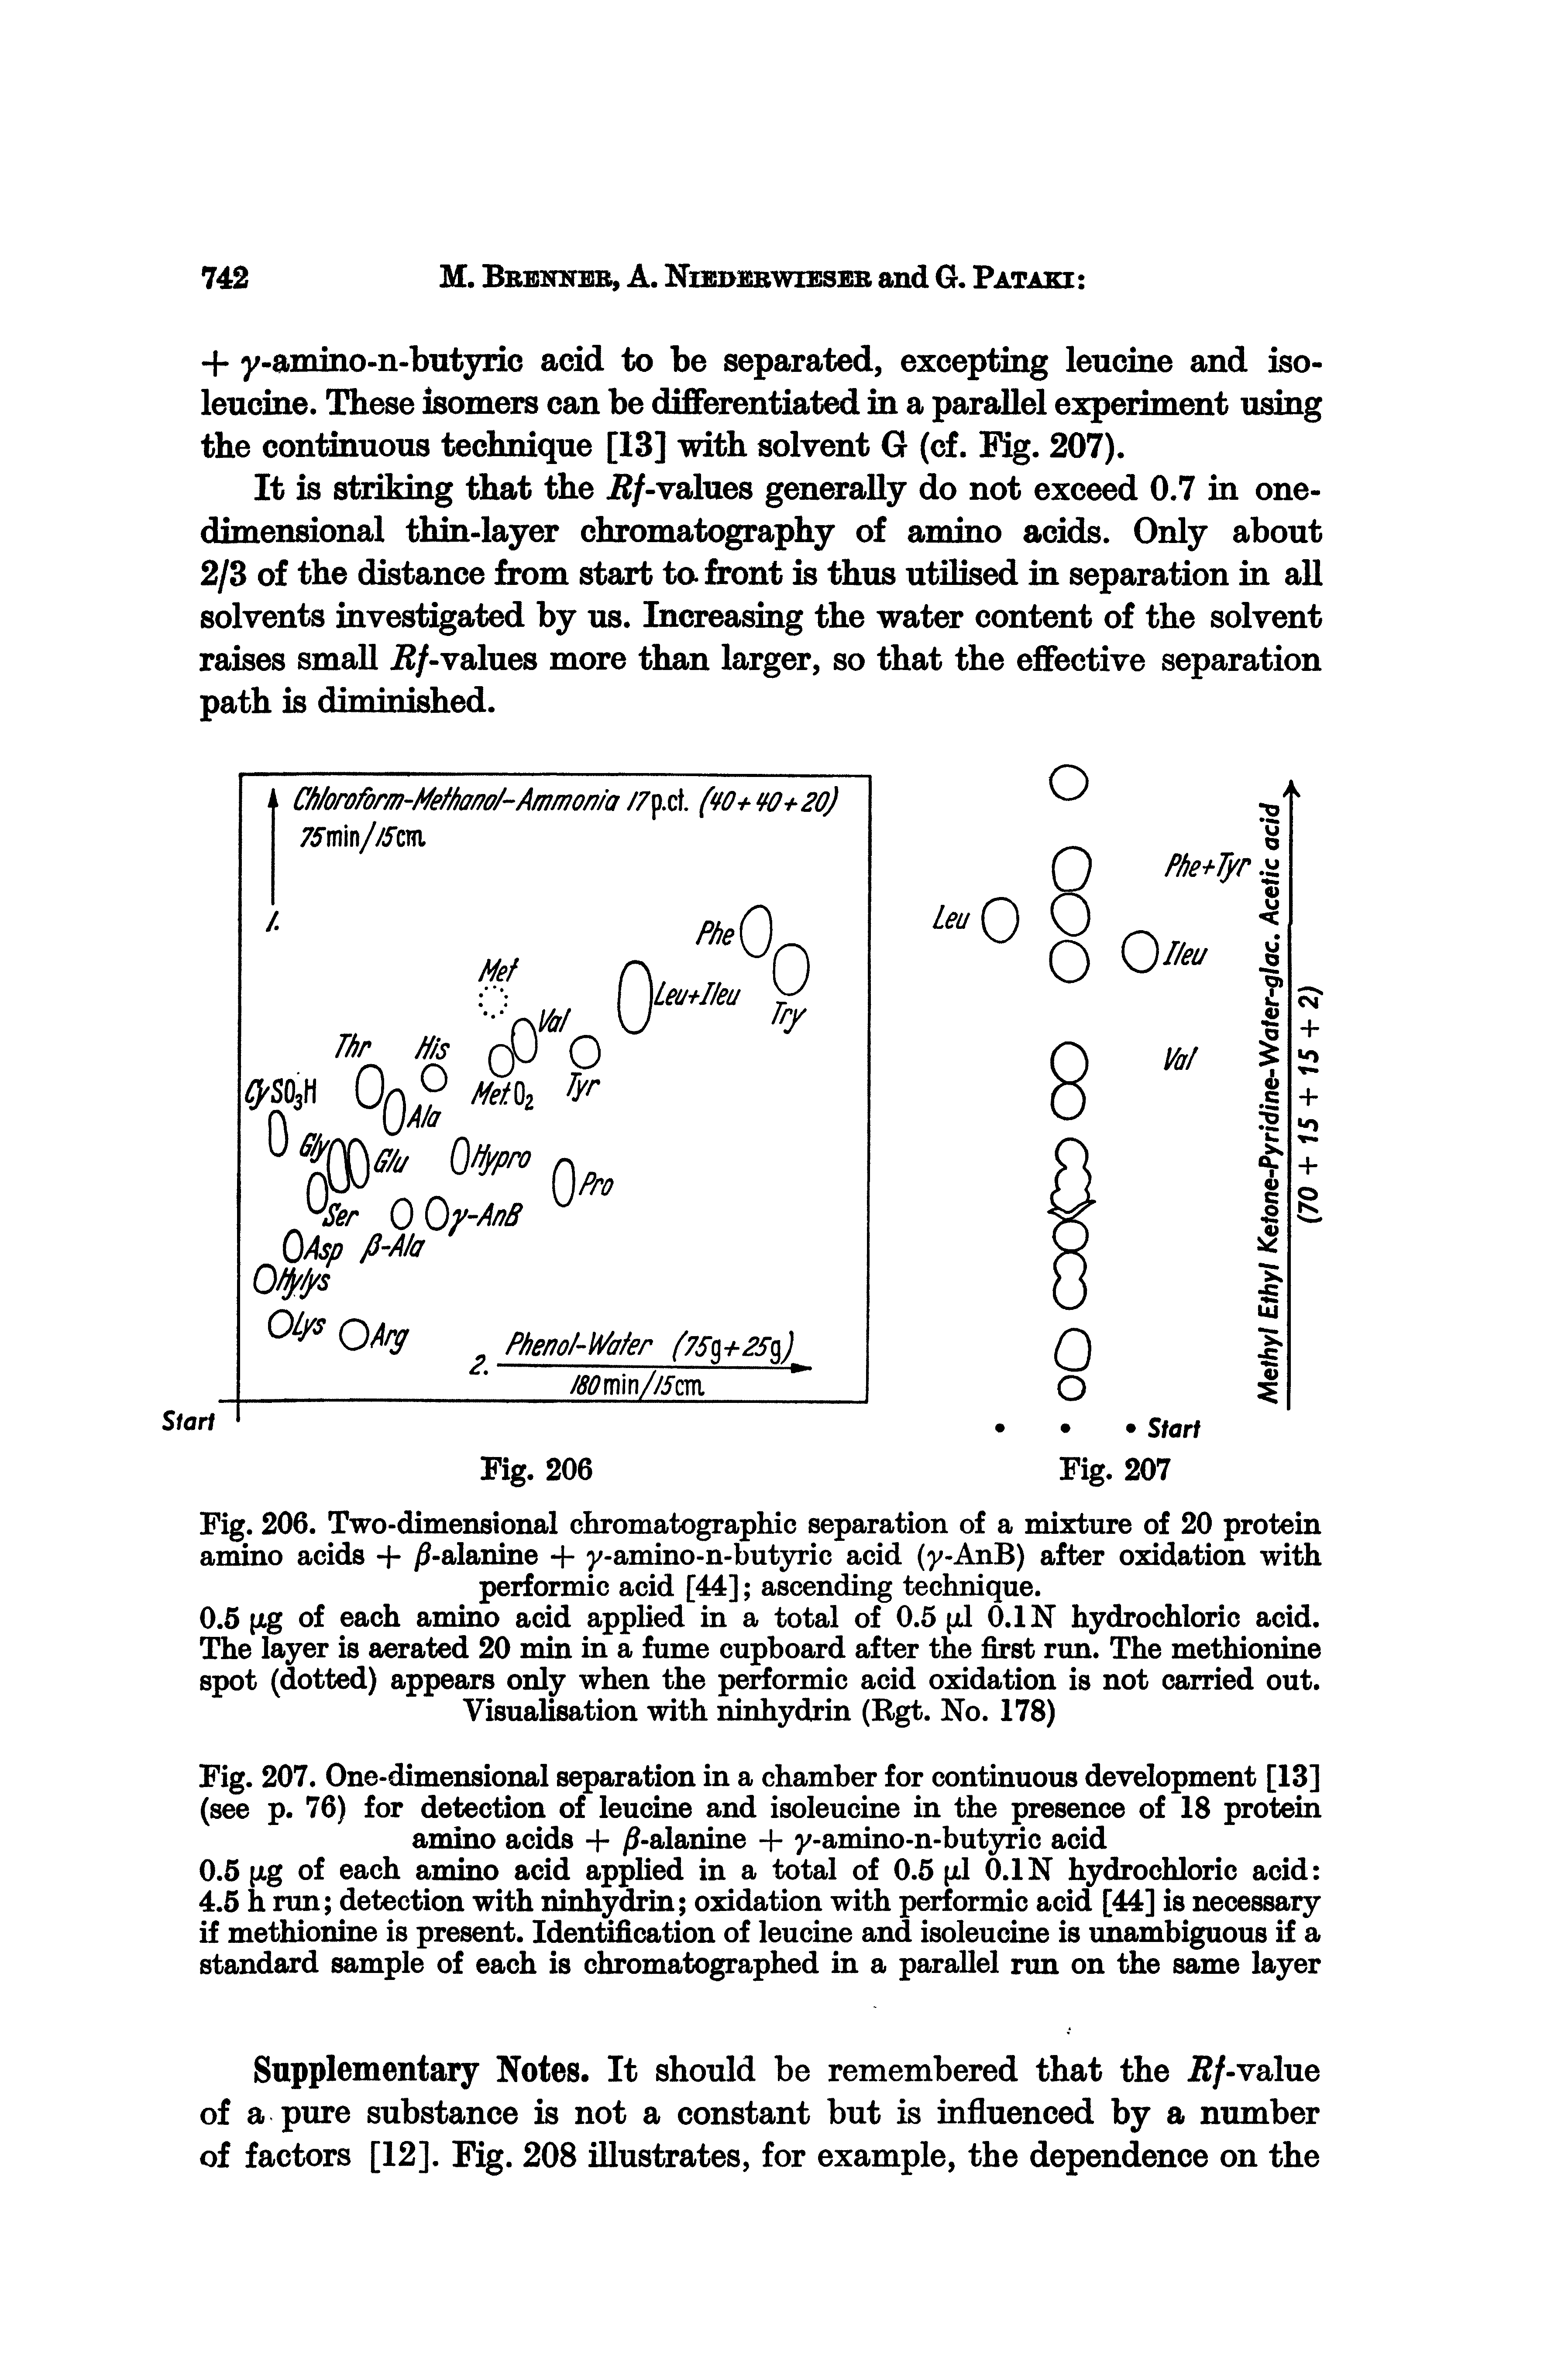 Fig. 206. Two-dimensional chromatographic separation of a mixture of 20 protein amino acids + j -alanine + y-amino-n-butyric acid (y-AnB) after oxidation with performic acid [44] ascending technique.